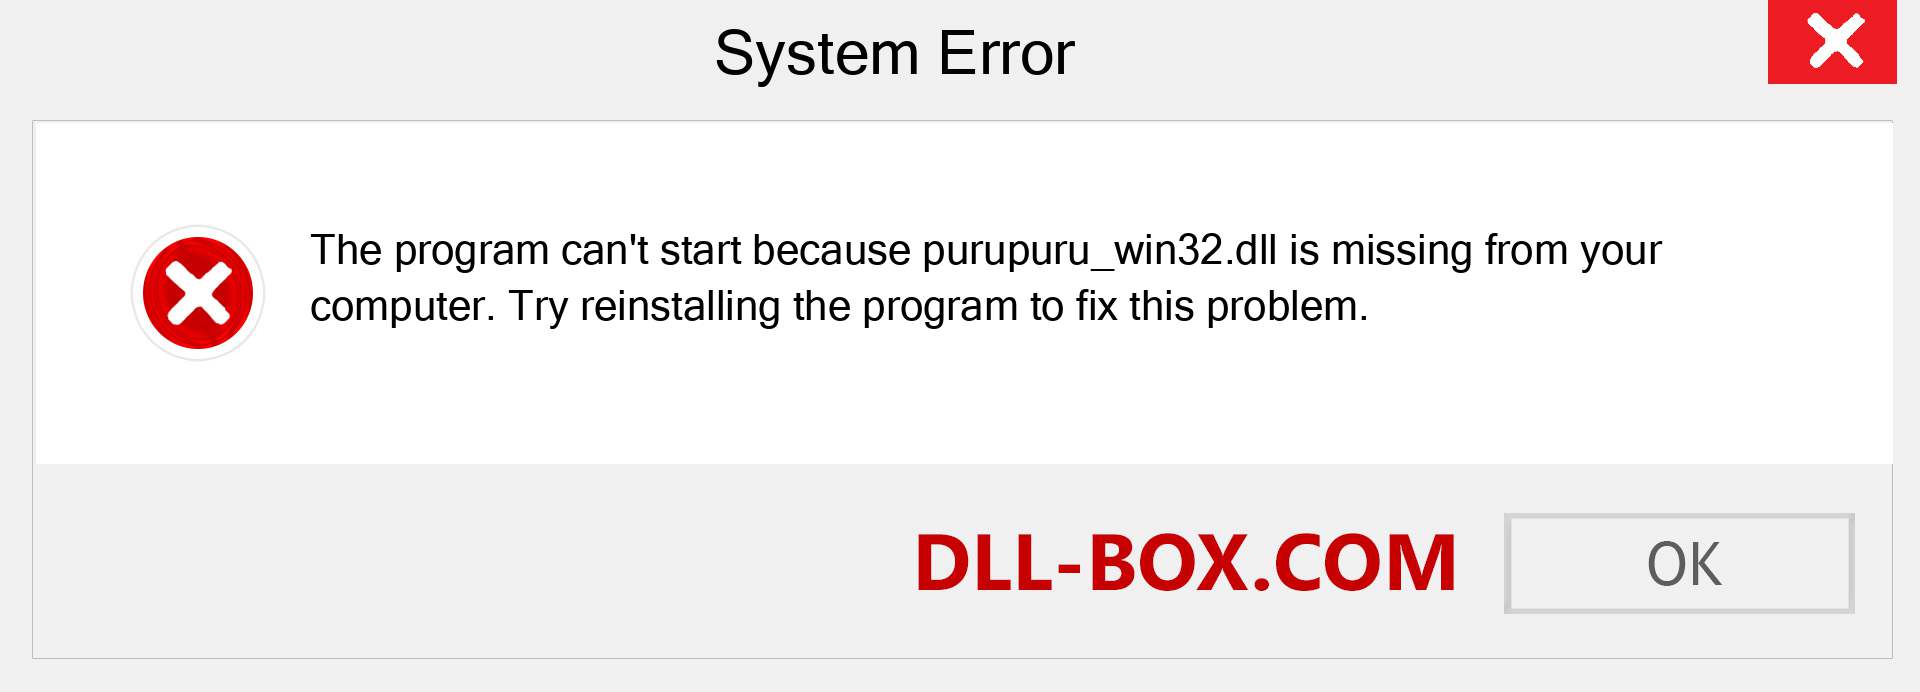  purupuru_win32.dll file is missing?. Download for Windows 7, 8, 10 - Fix  purupuru_win32 dll Missing Error on Windows, photos, images